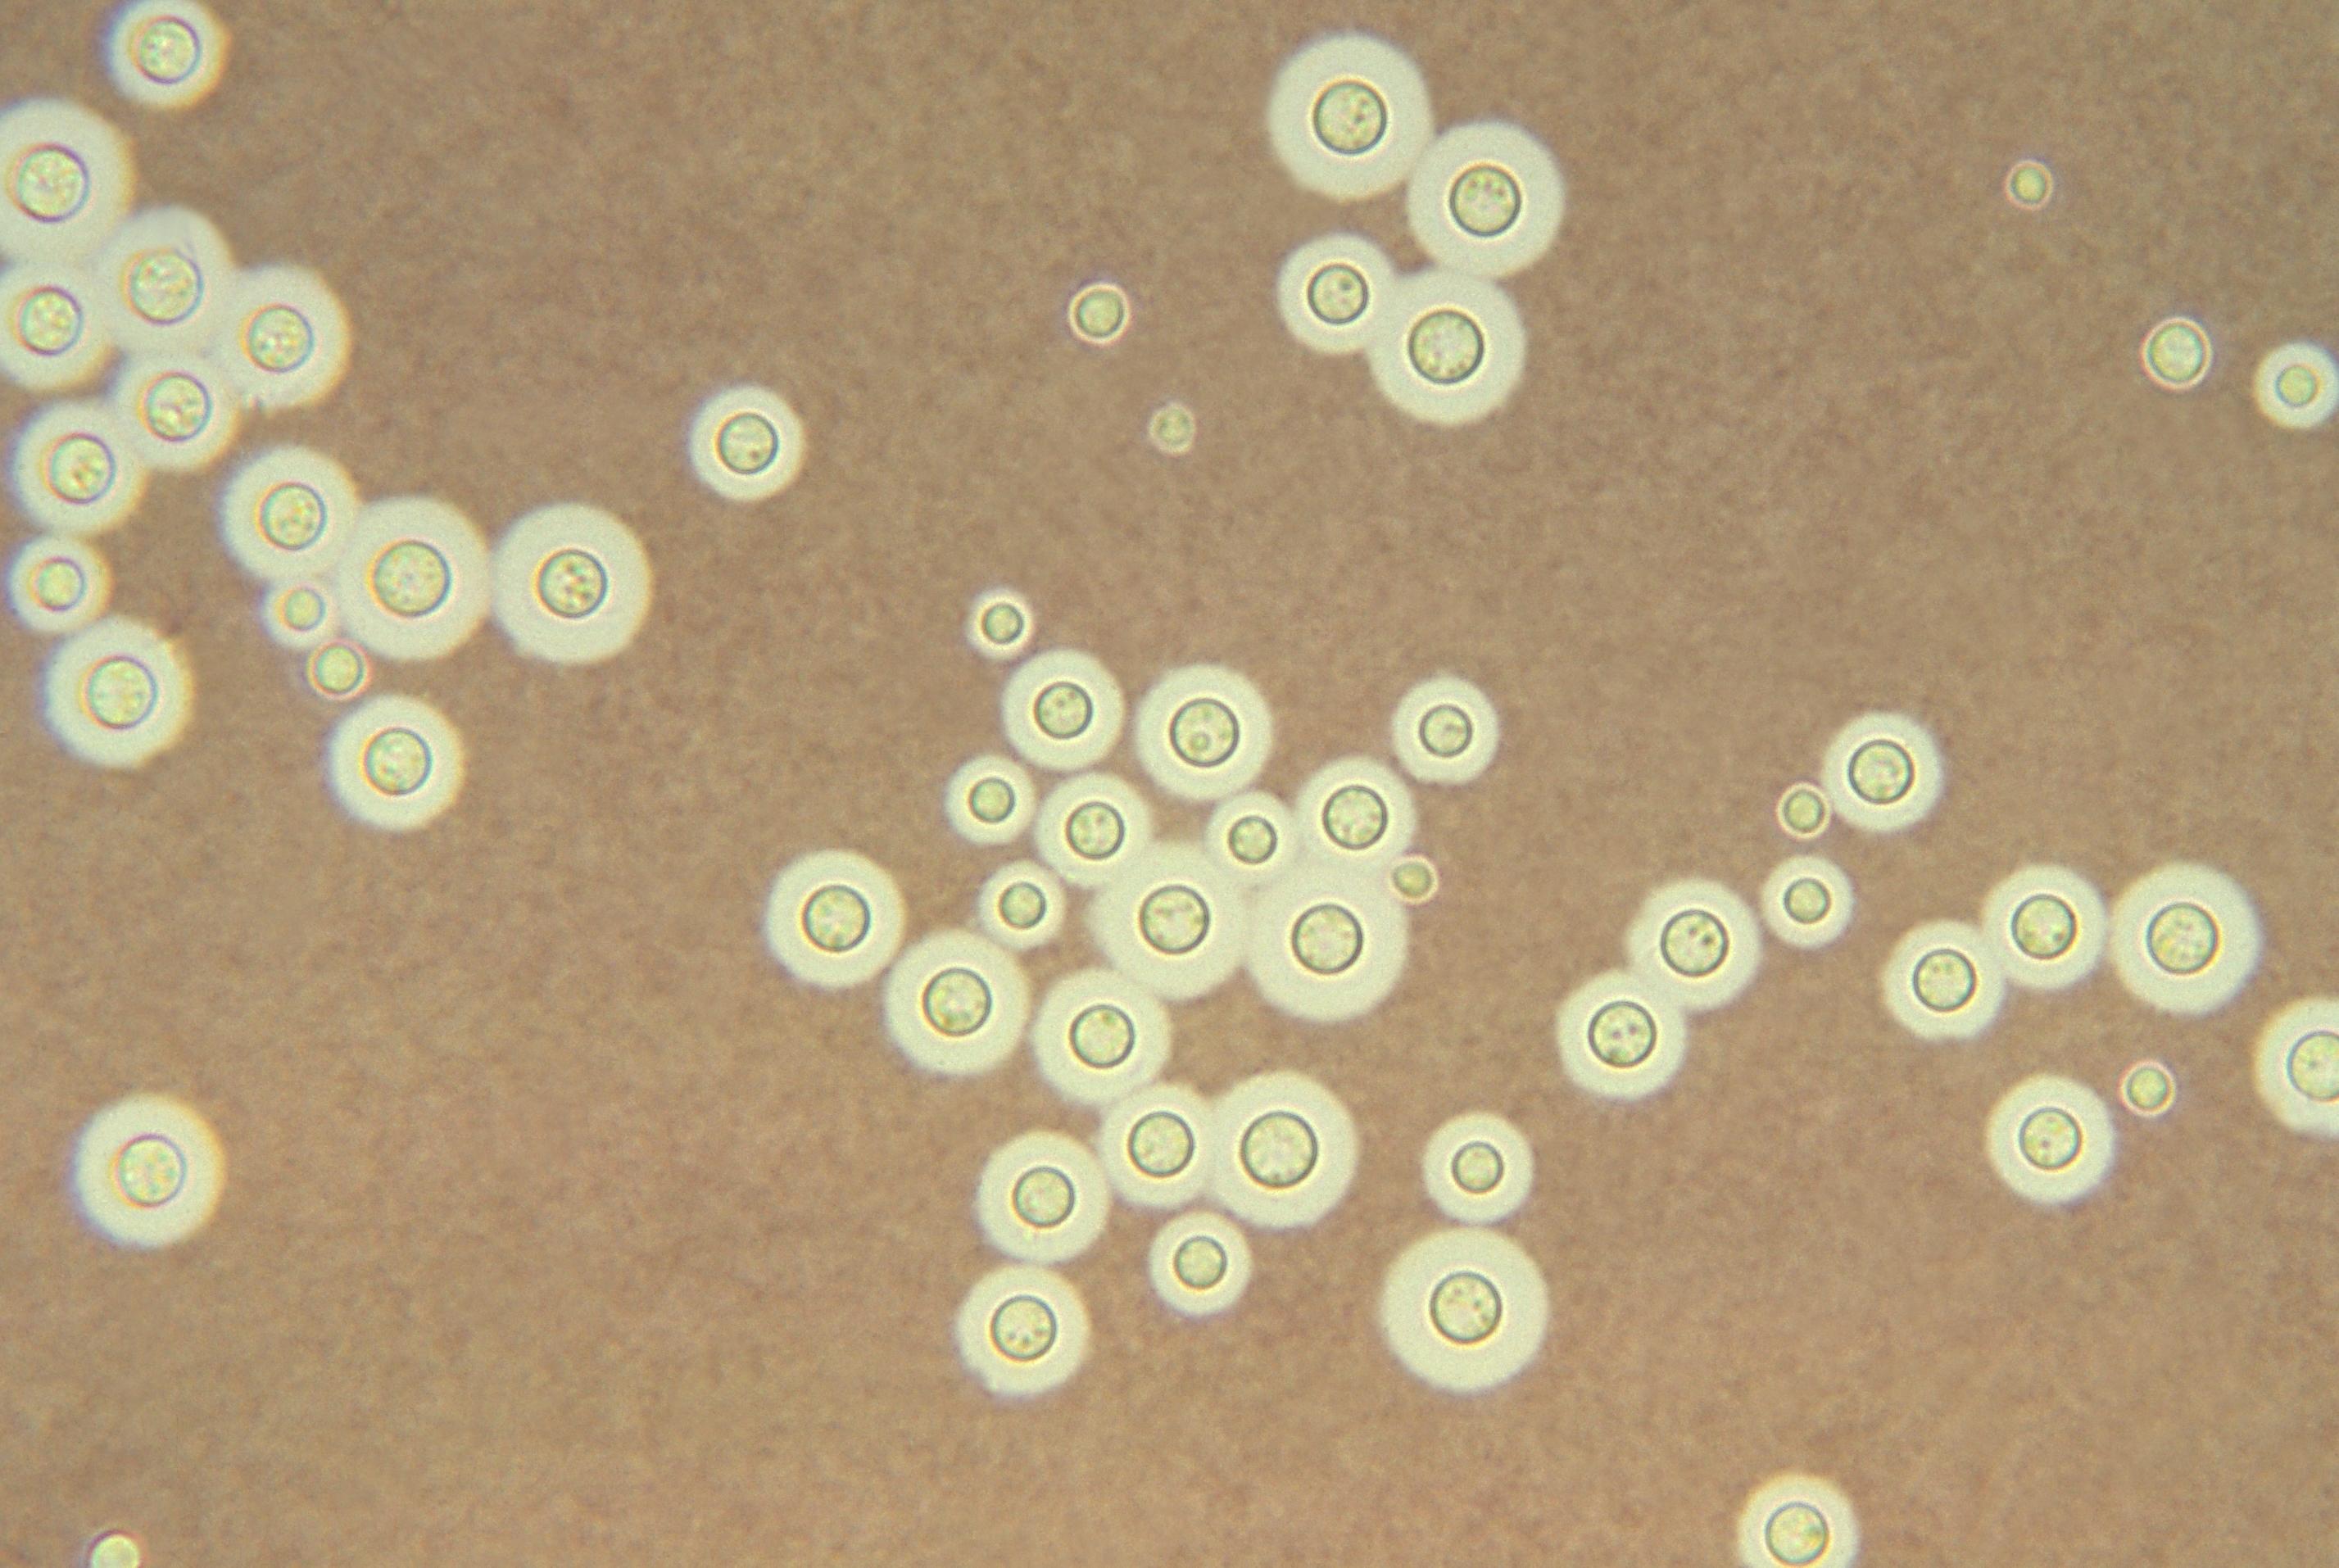 Photomicrograph of an India ink stain of encapsulated <EM>Cryptococcus 
    neoformans</EM> shlwing encapsulated yeast.